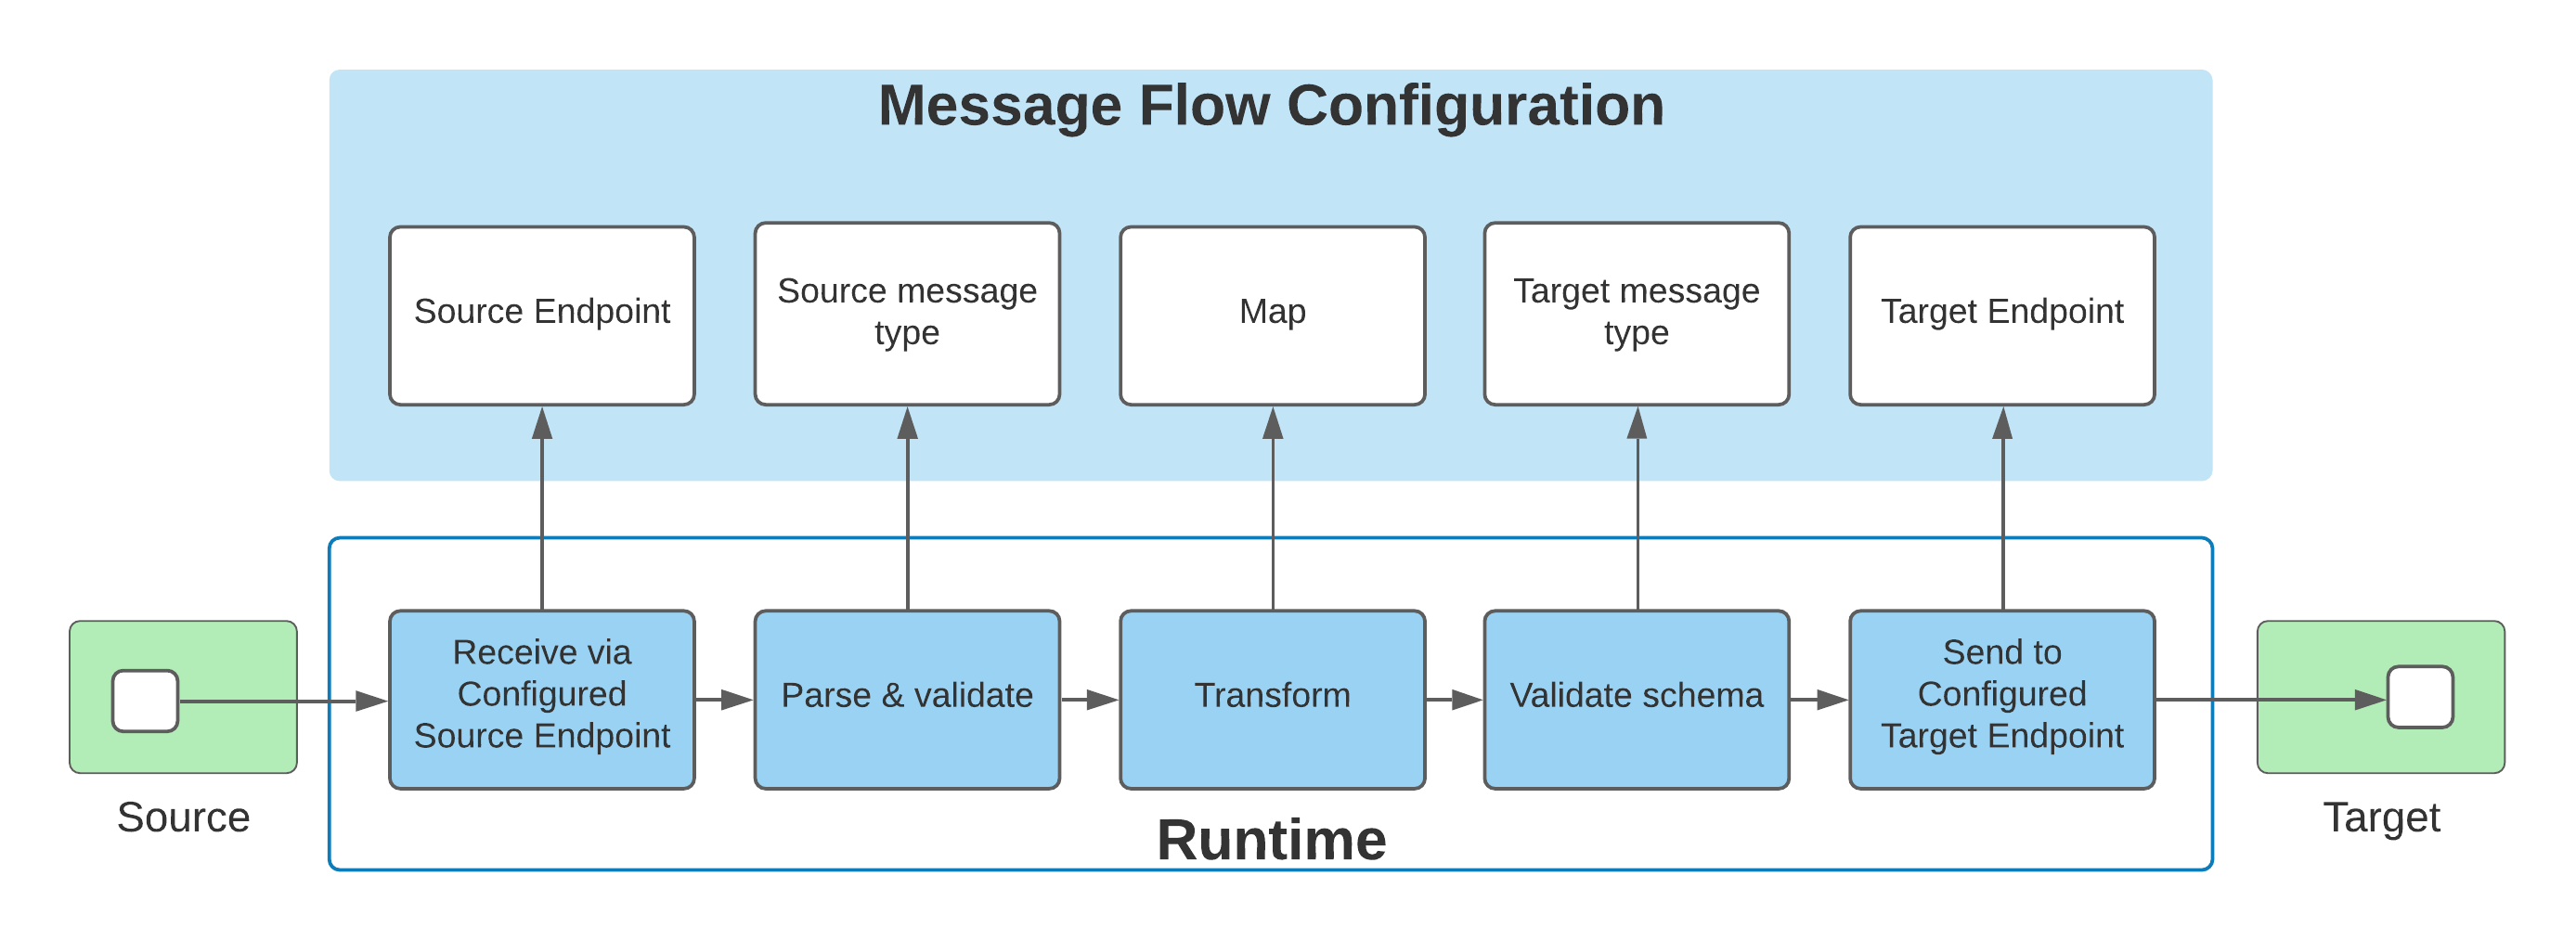 Partner Manager message flow configuration objects